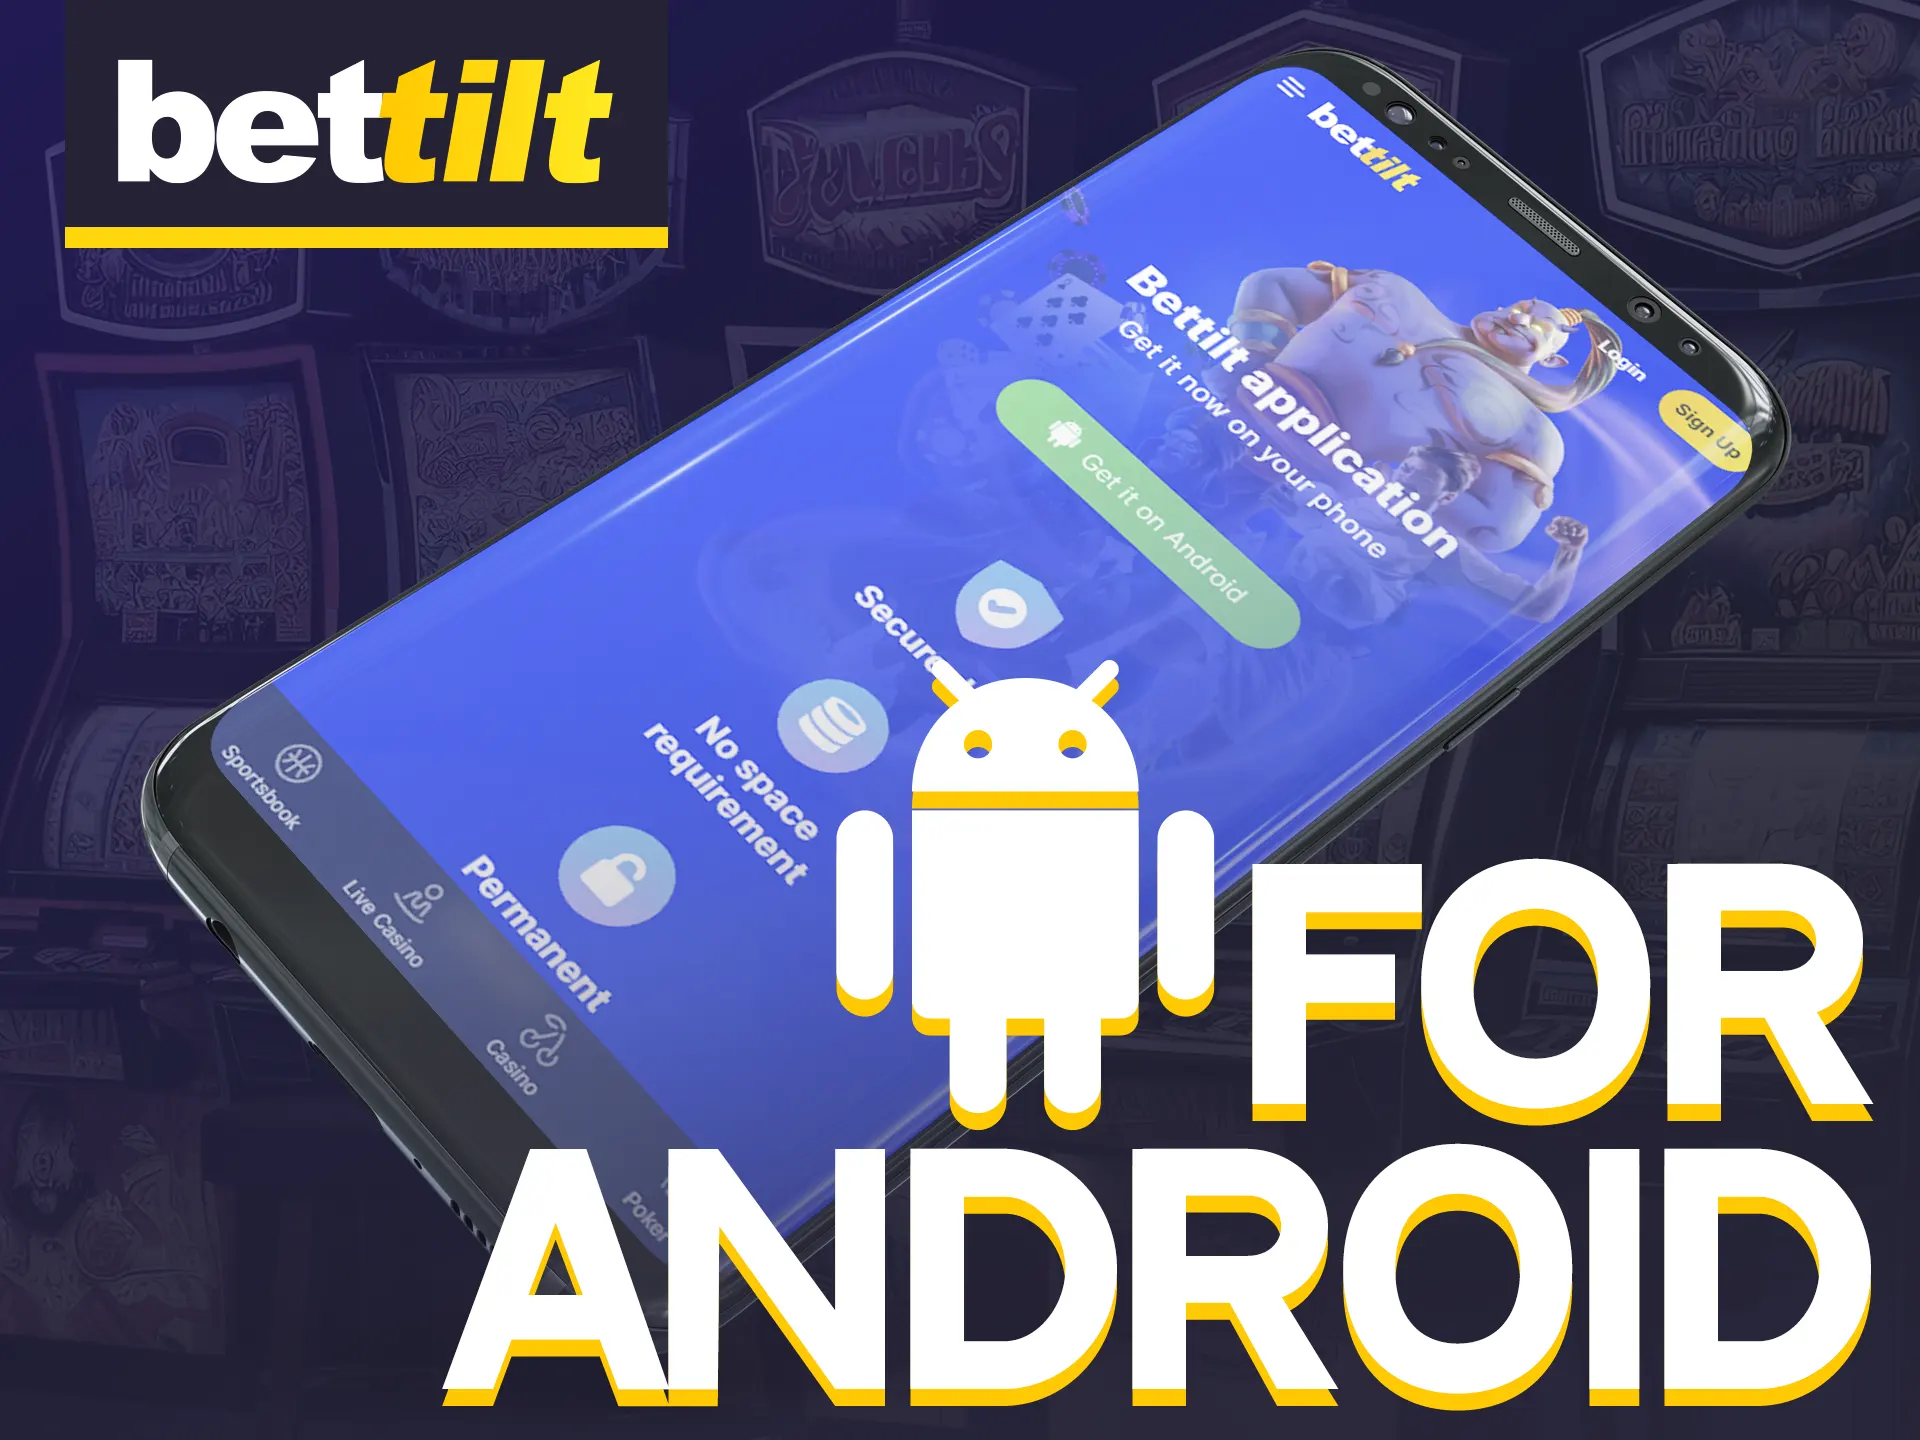 Download Bettilt app from official website for Android.